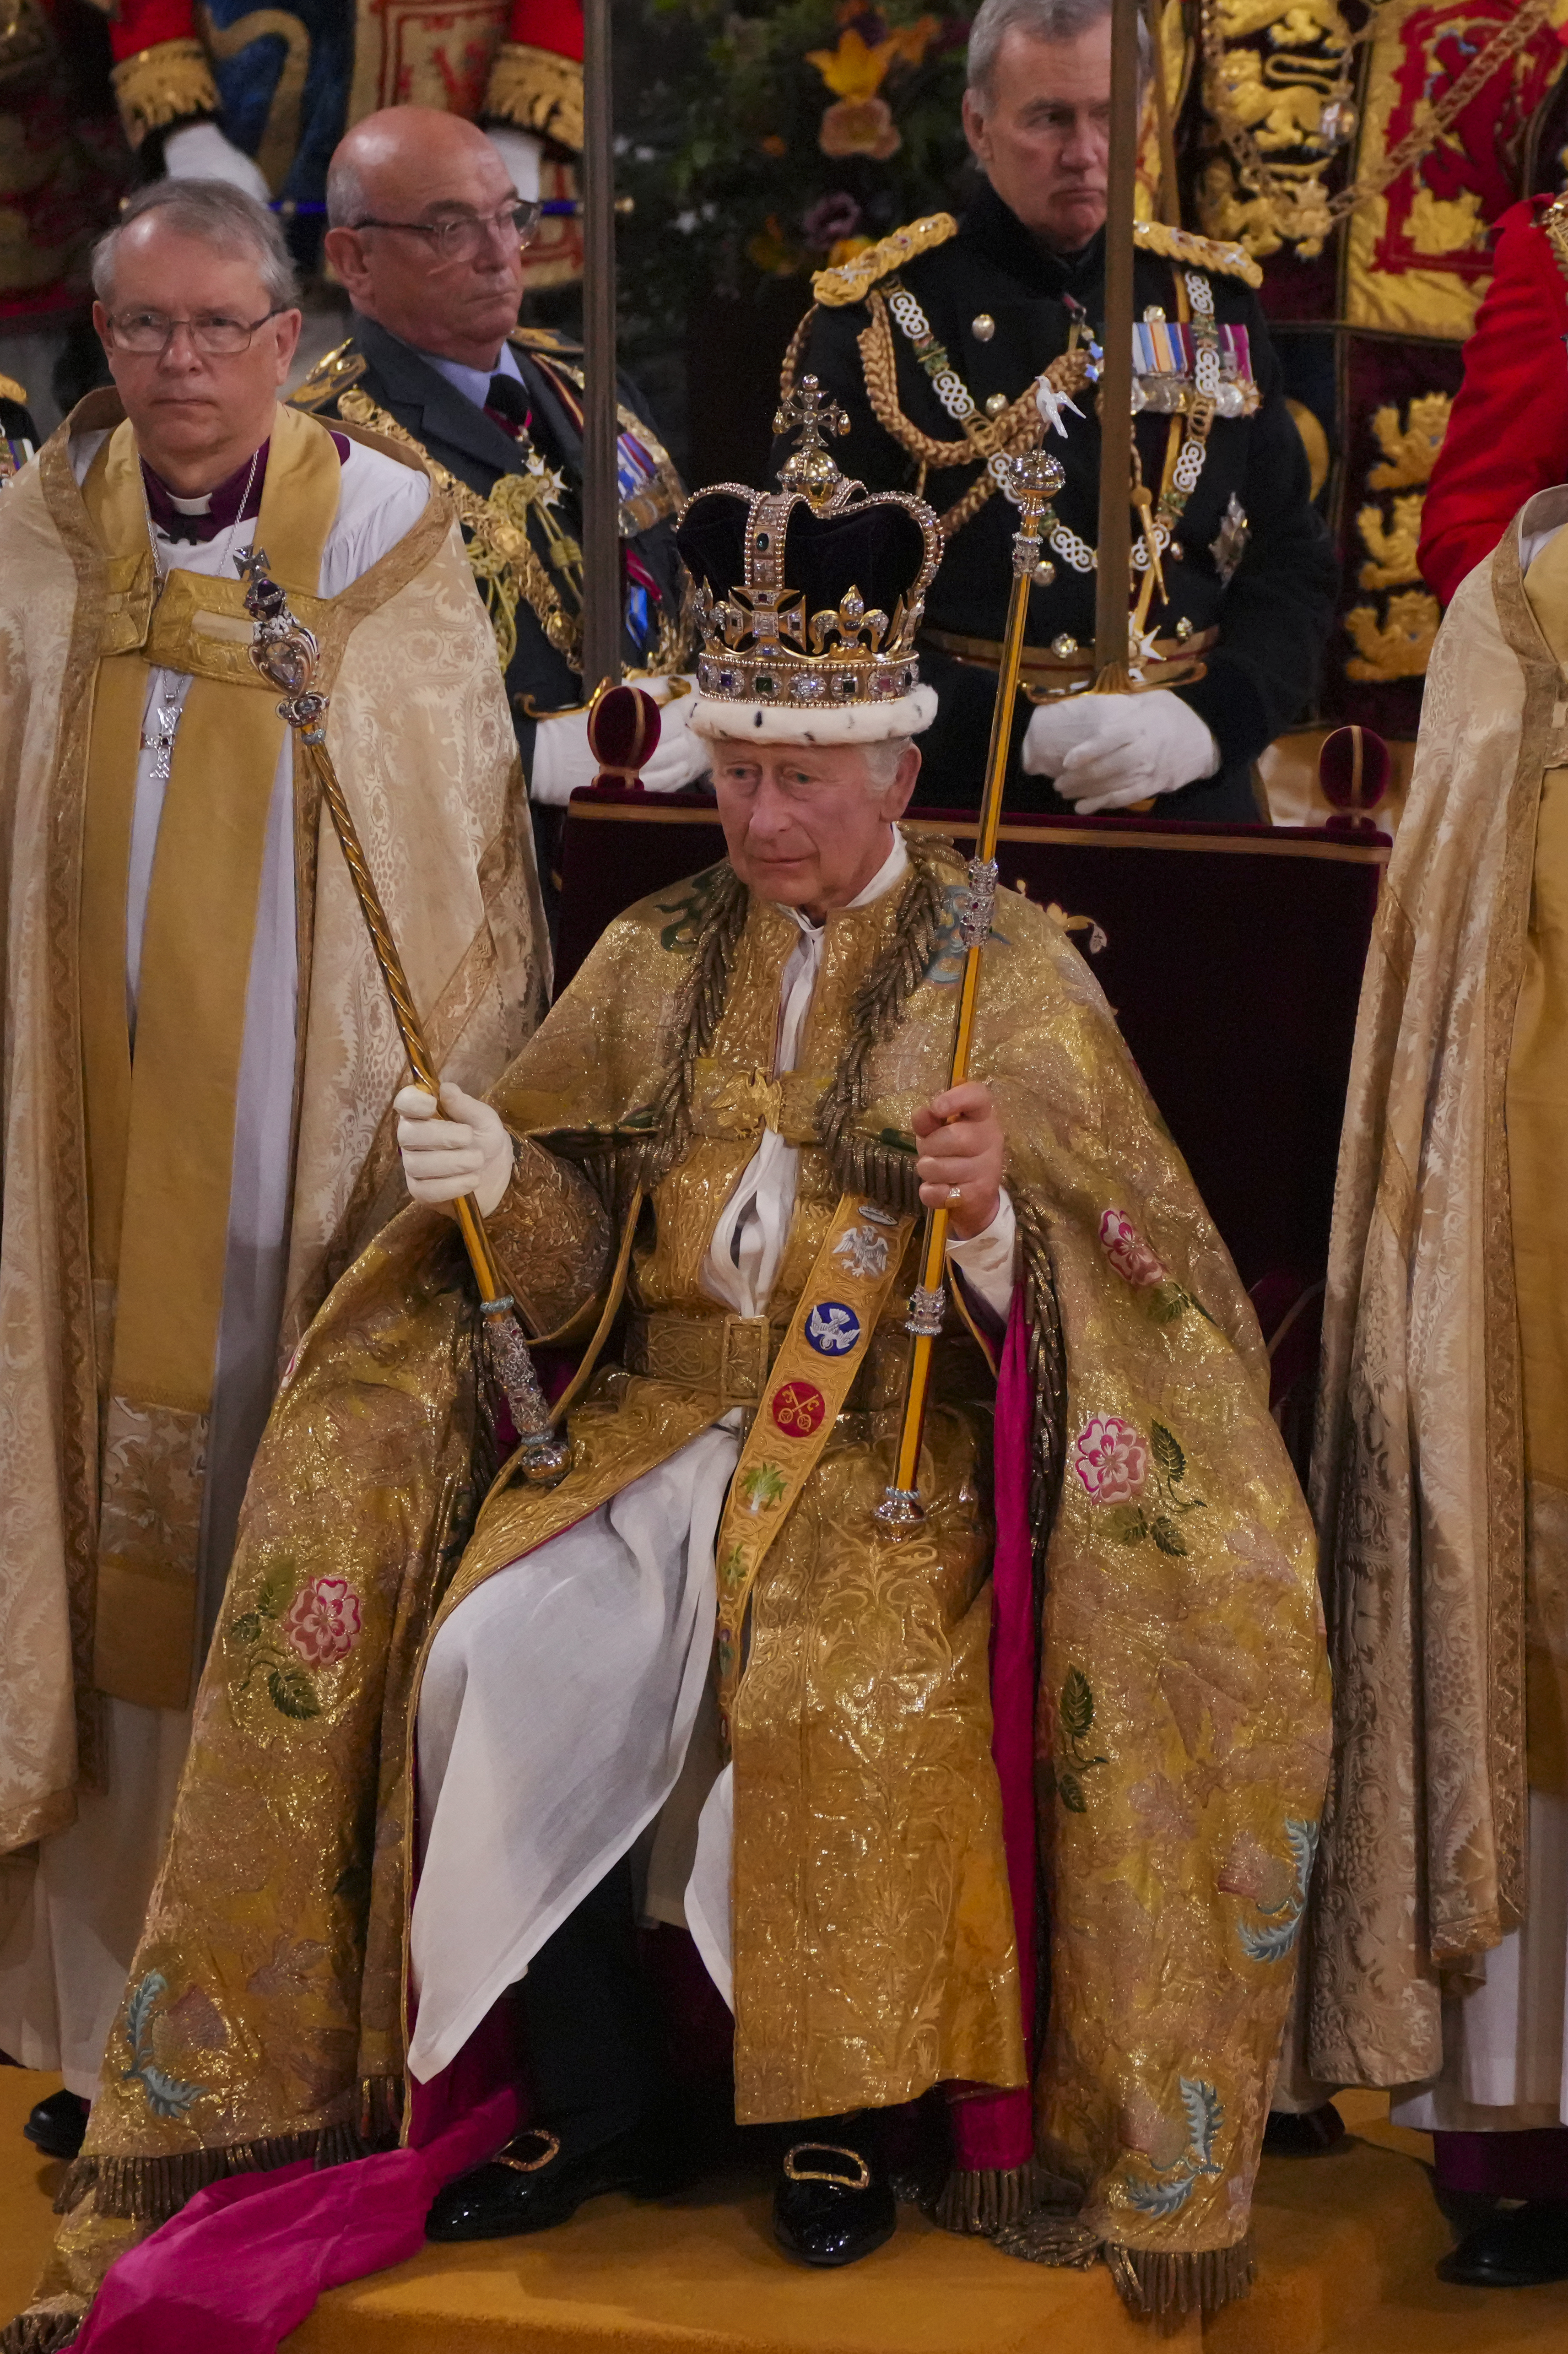 King Charles III seated in the coronation chair, wearing St Edward's Crown 